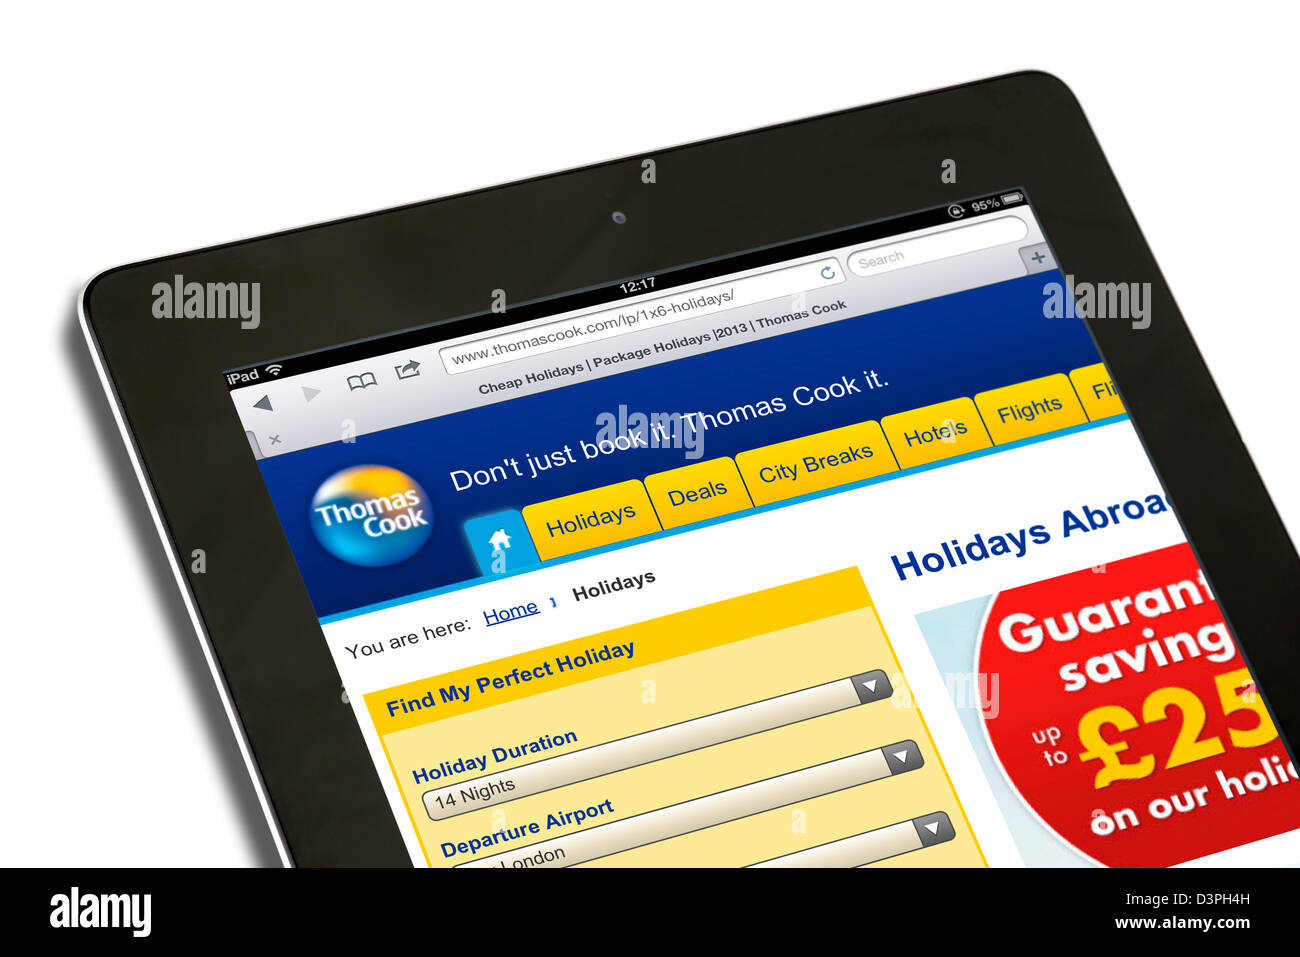 Booking a holiday on the Thomas Cook holidays website, UK Stock Photo